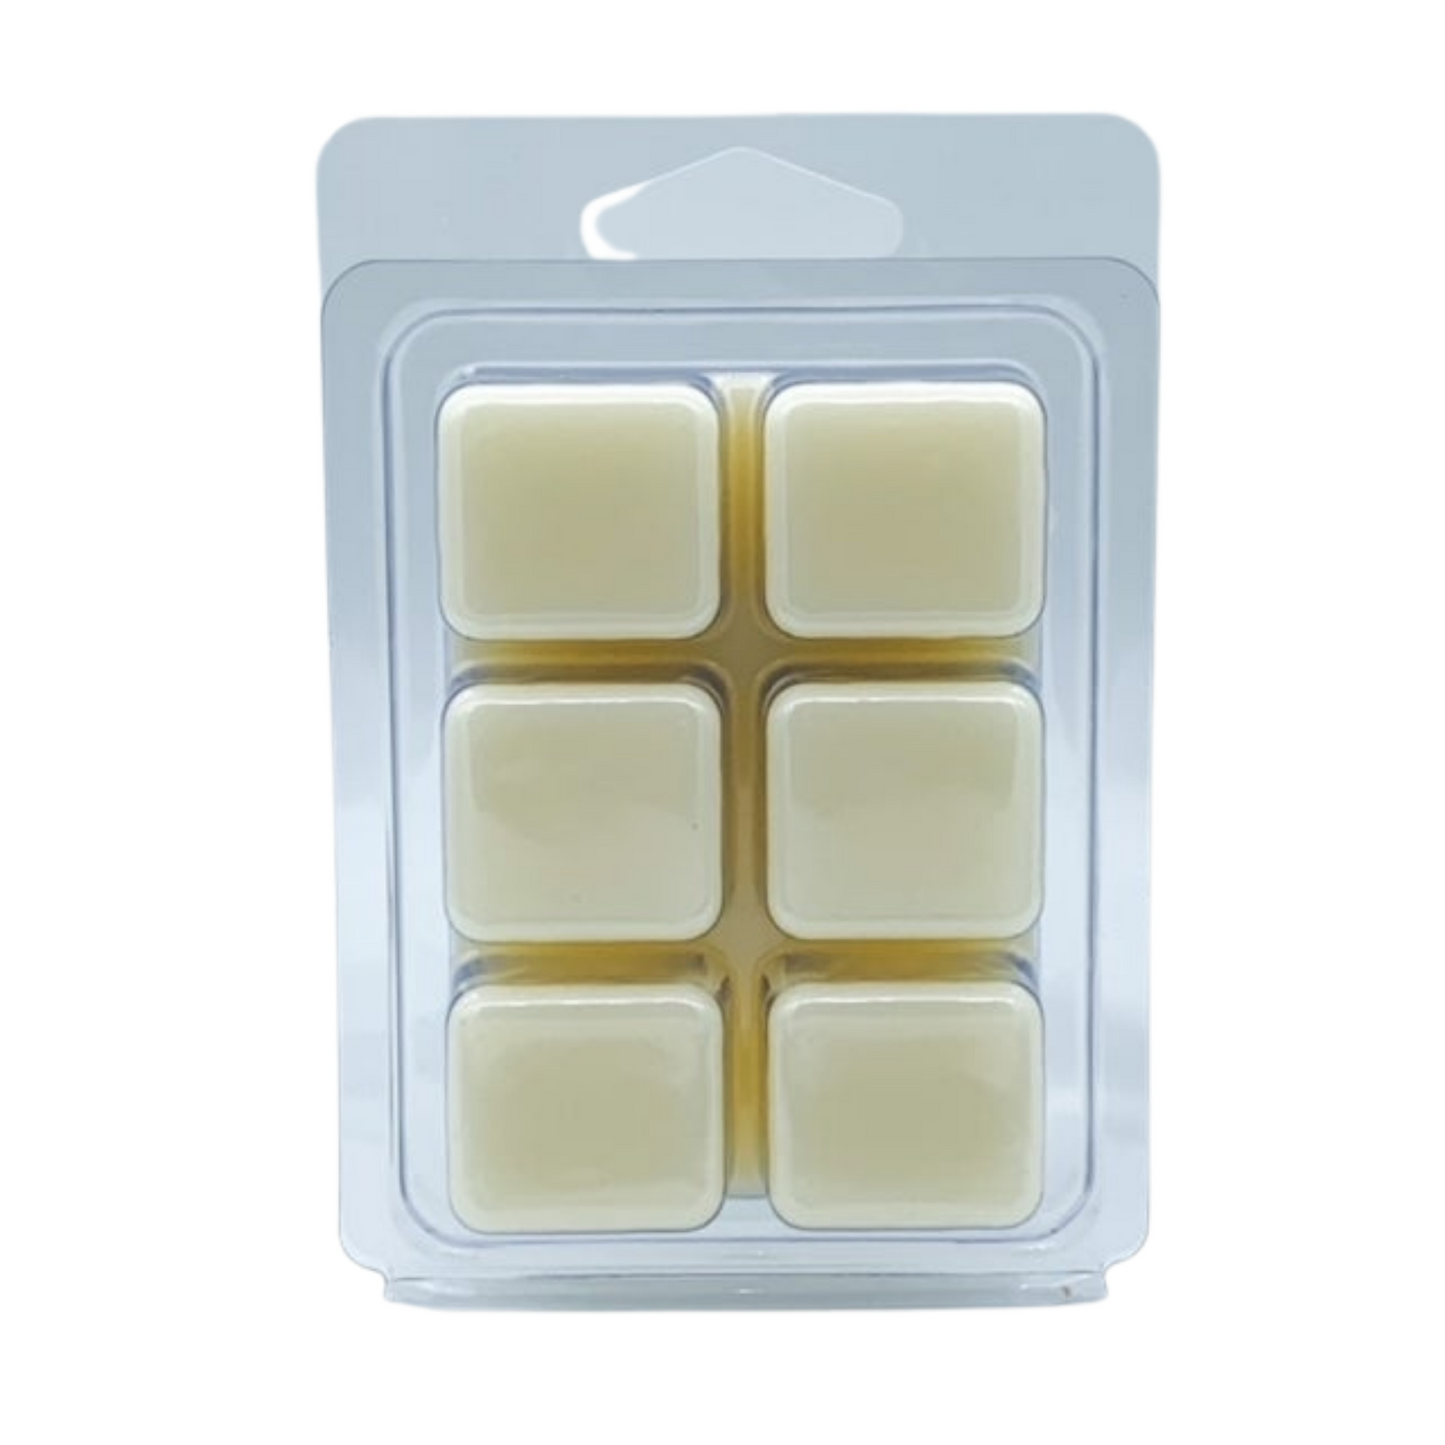 GERANIUM BAMBOO | Scented Soy Wax Melts